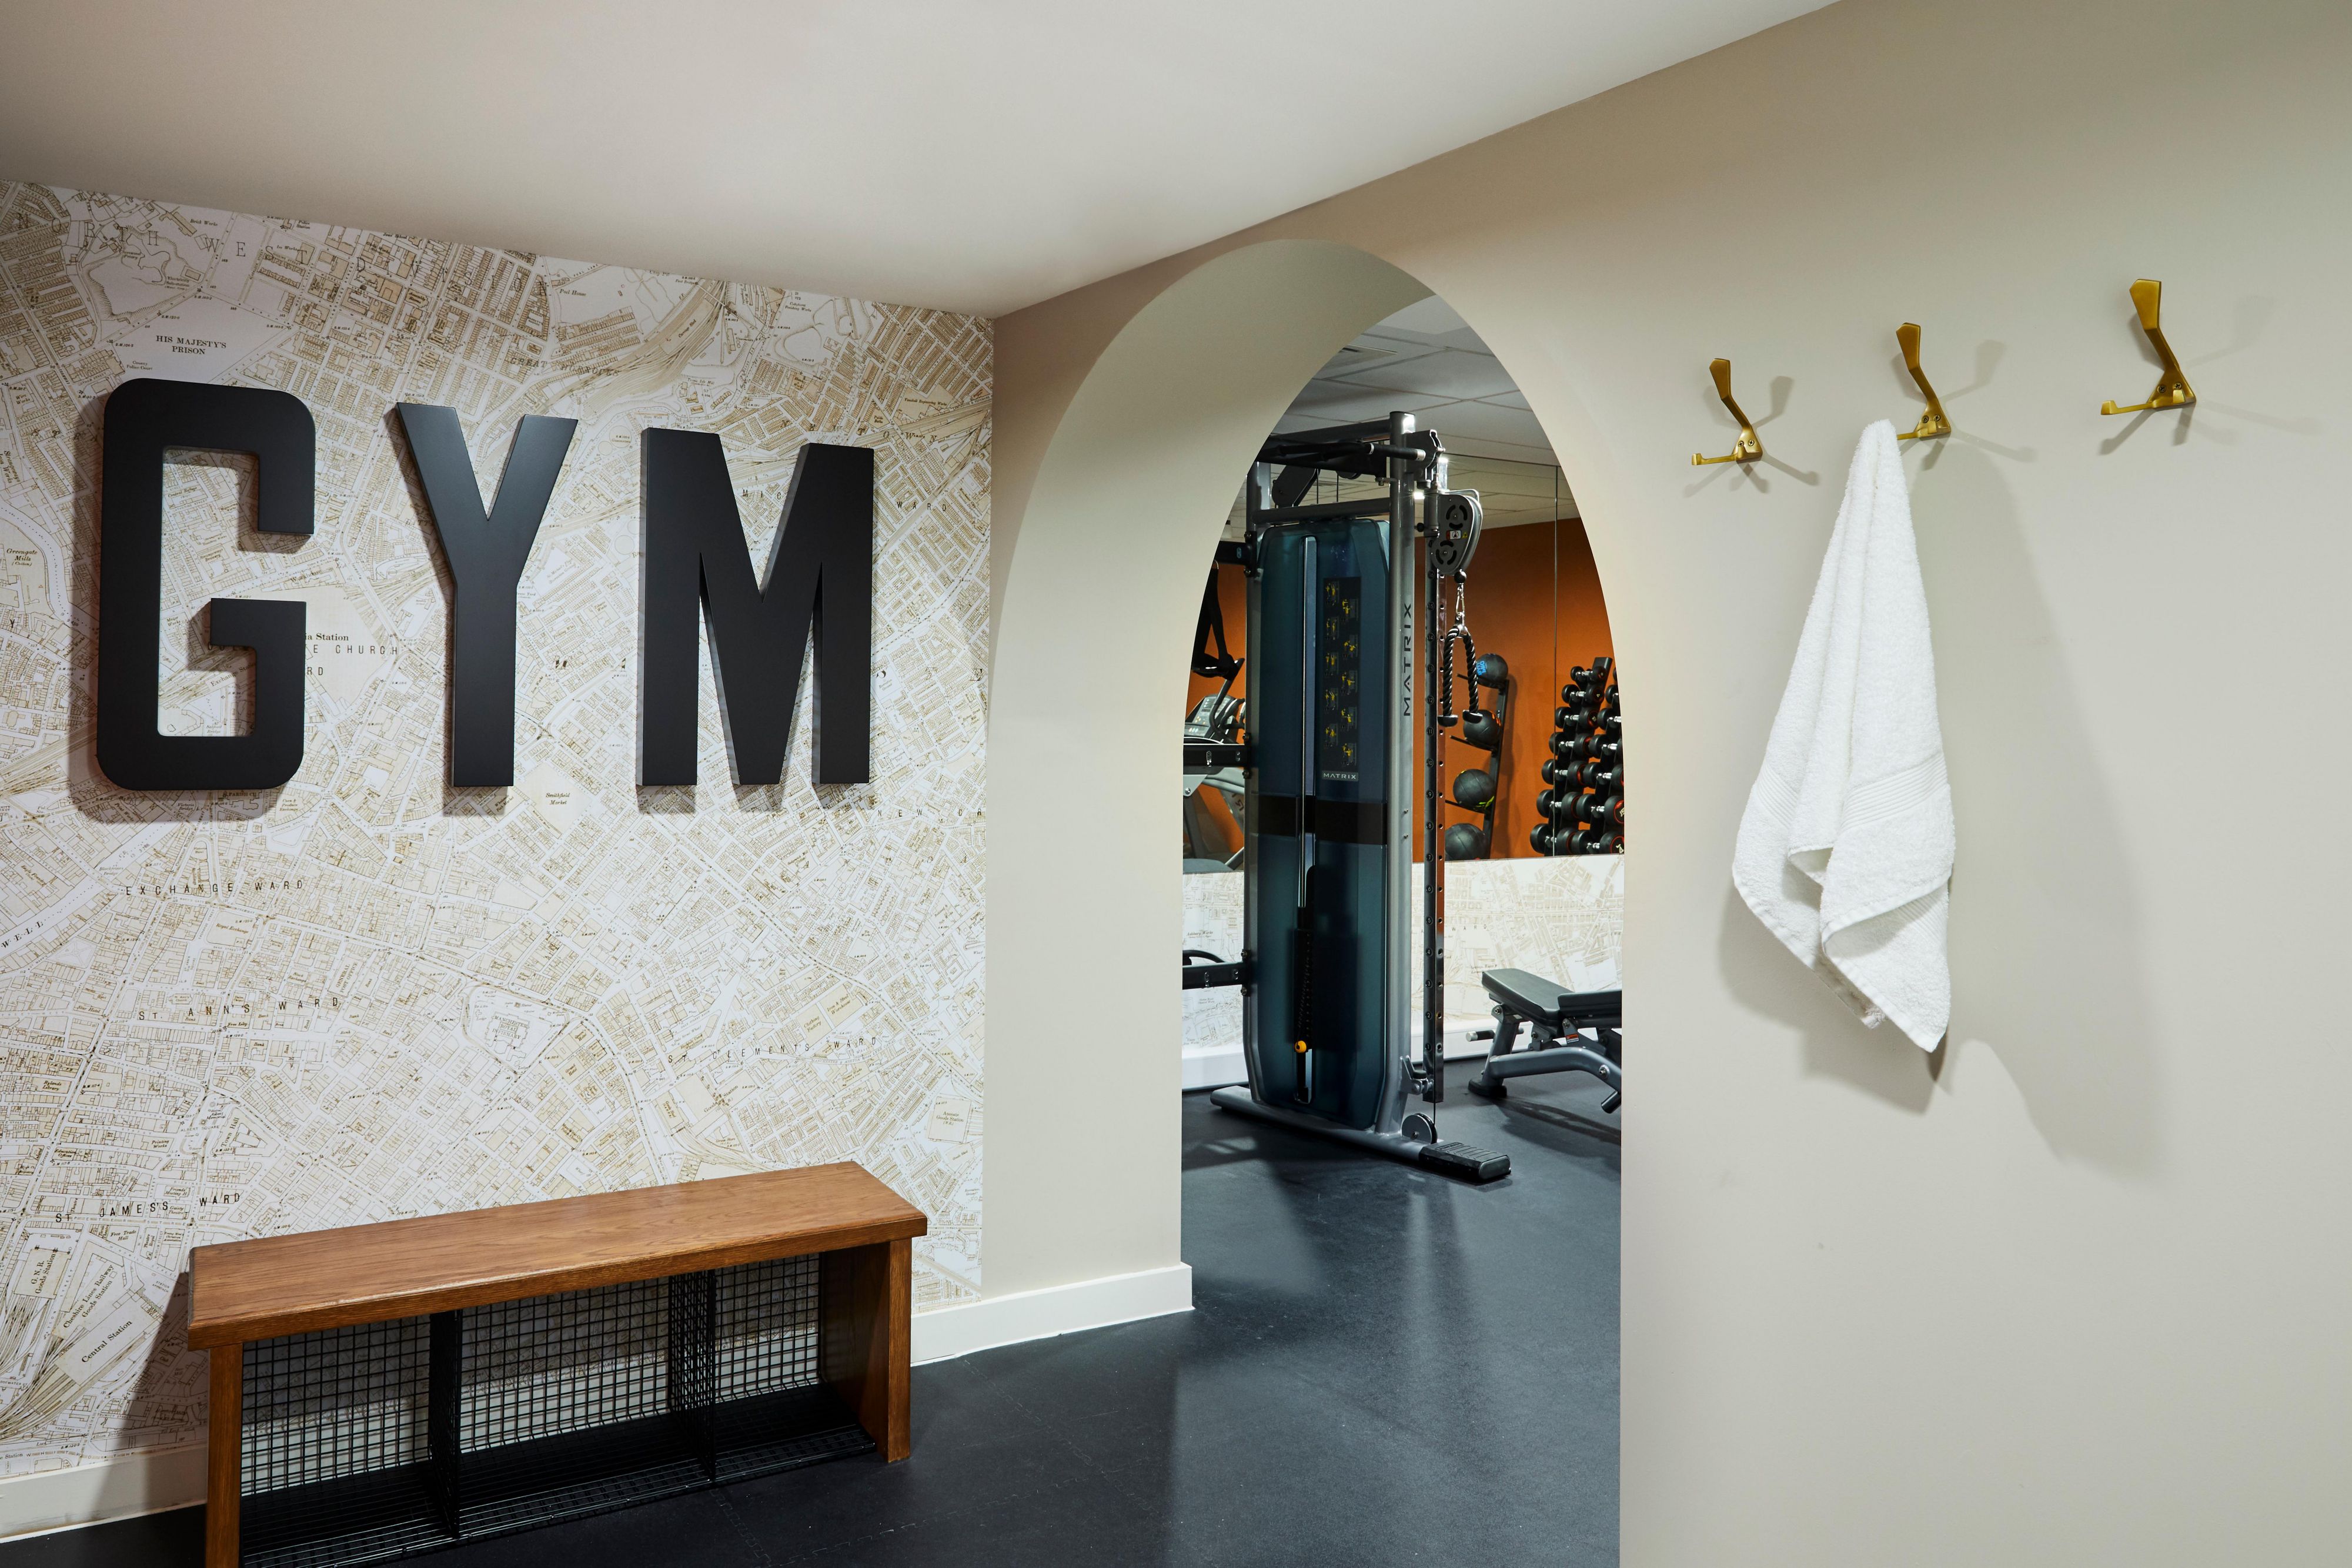 Choose from the option of letting off some steam in our on-site modern fitness suite, available free of charge to our overnight guests; or indulge yourself with a day pass at our partnered gym Nuffield Health Manchester Printworks, including access to a sauna and swimming pool. Please ask at reception for further information.